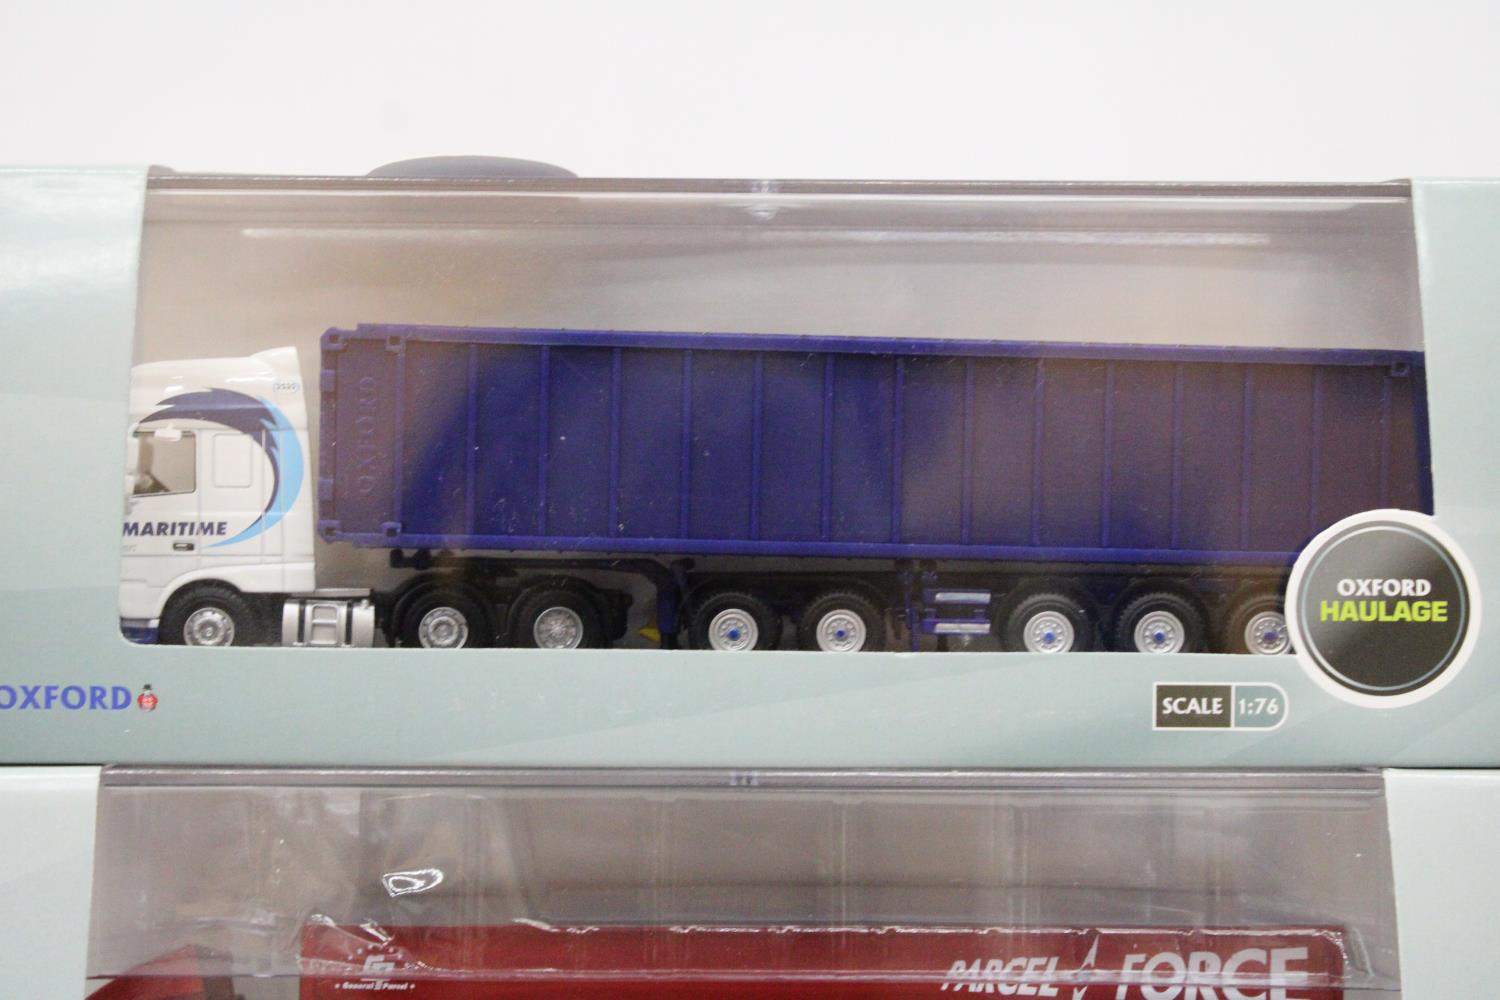 THREE AS NEW AND BOXED OXFORD HAULAGE WAGONS - Image 4 of 6